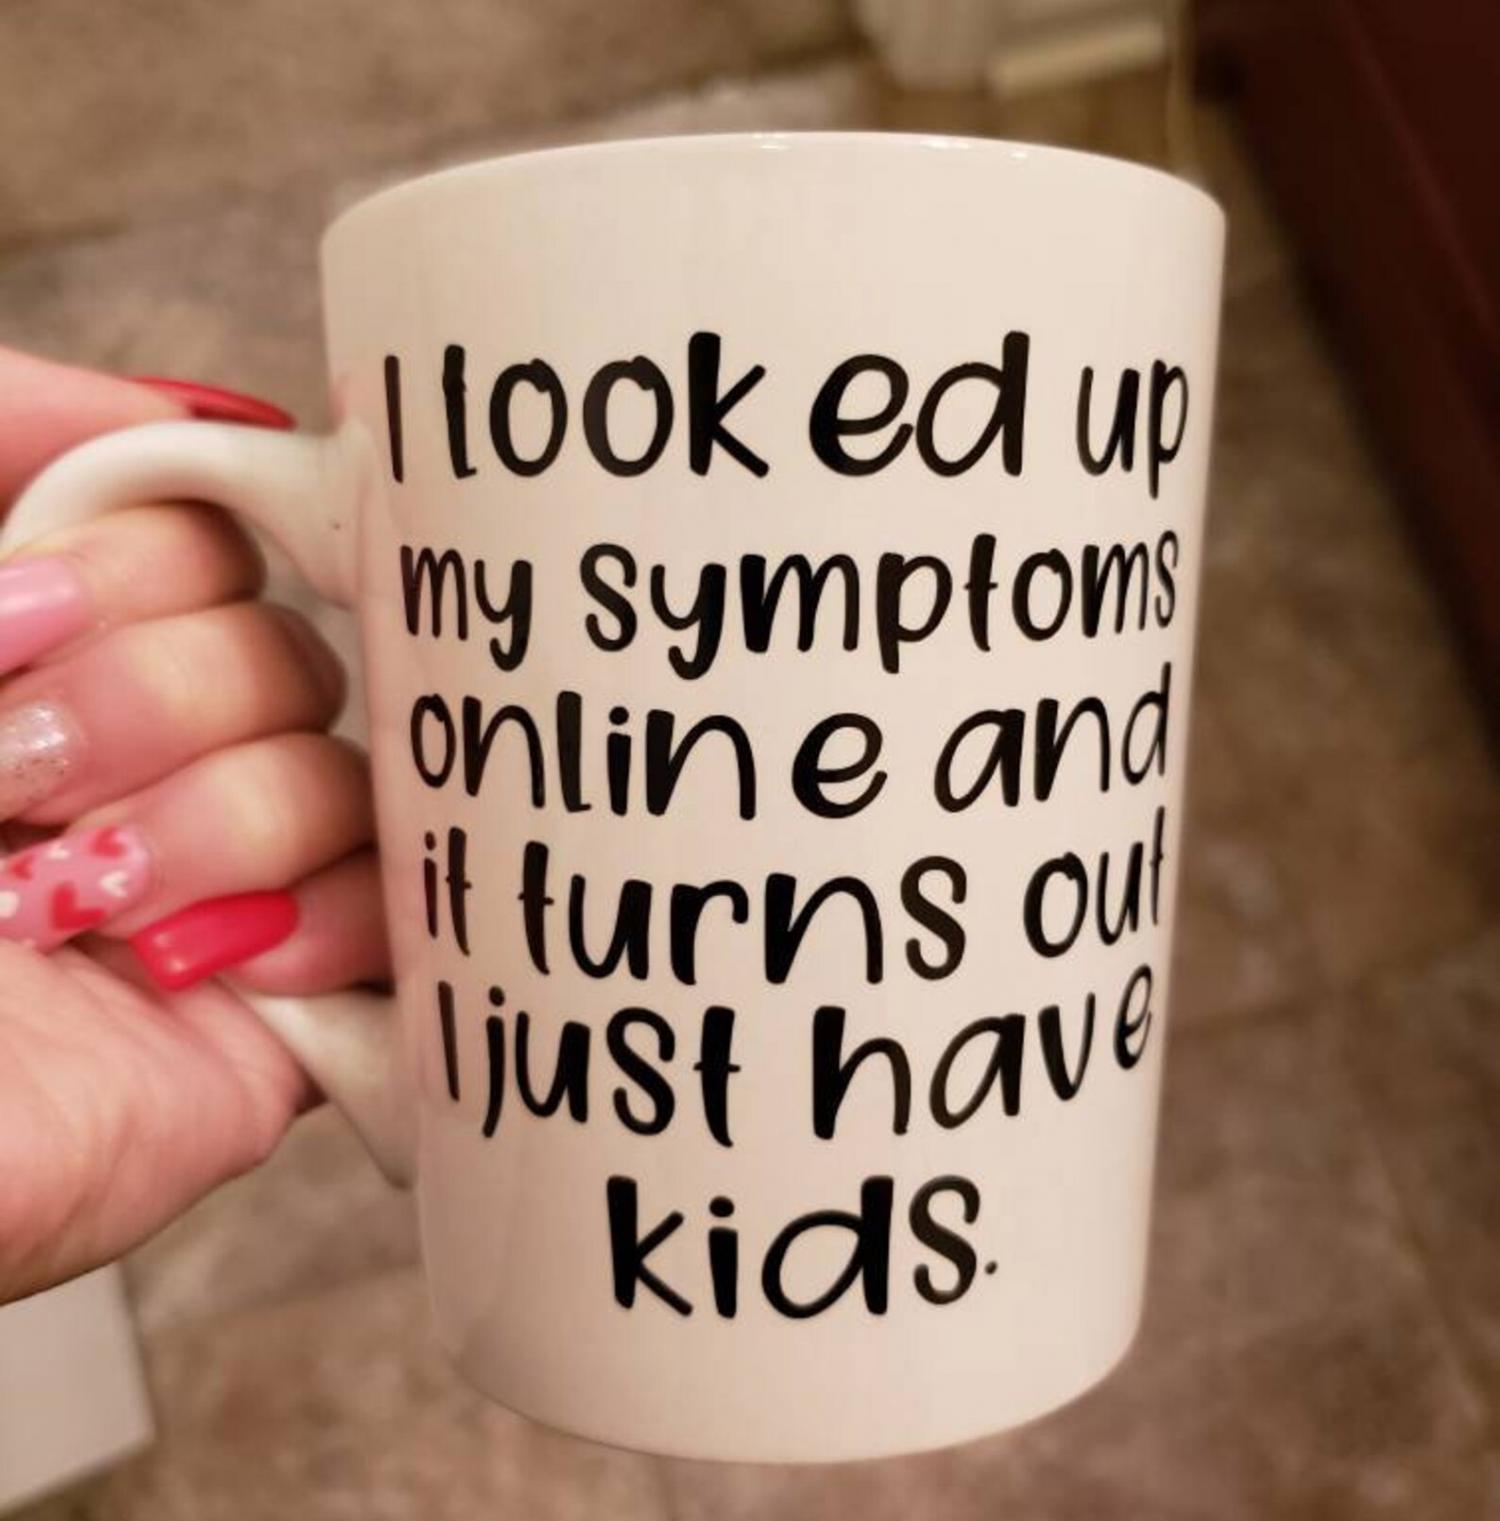 Black colored 'I Looked Up My Symptoms Online And It Turns Out I Just Have Kids' printed on a pink design white mug